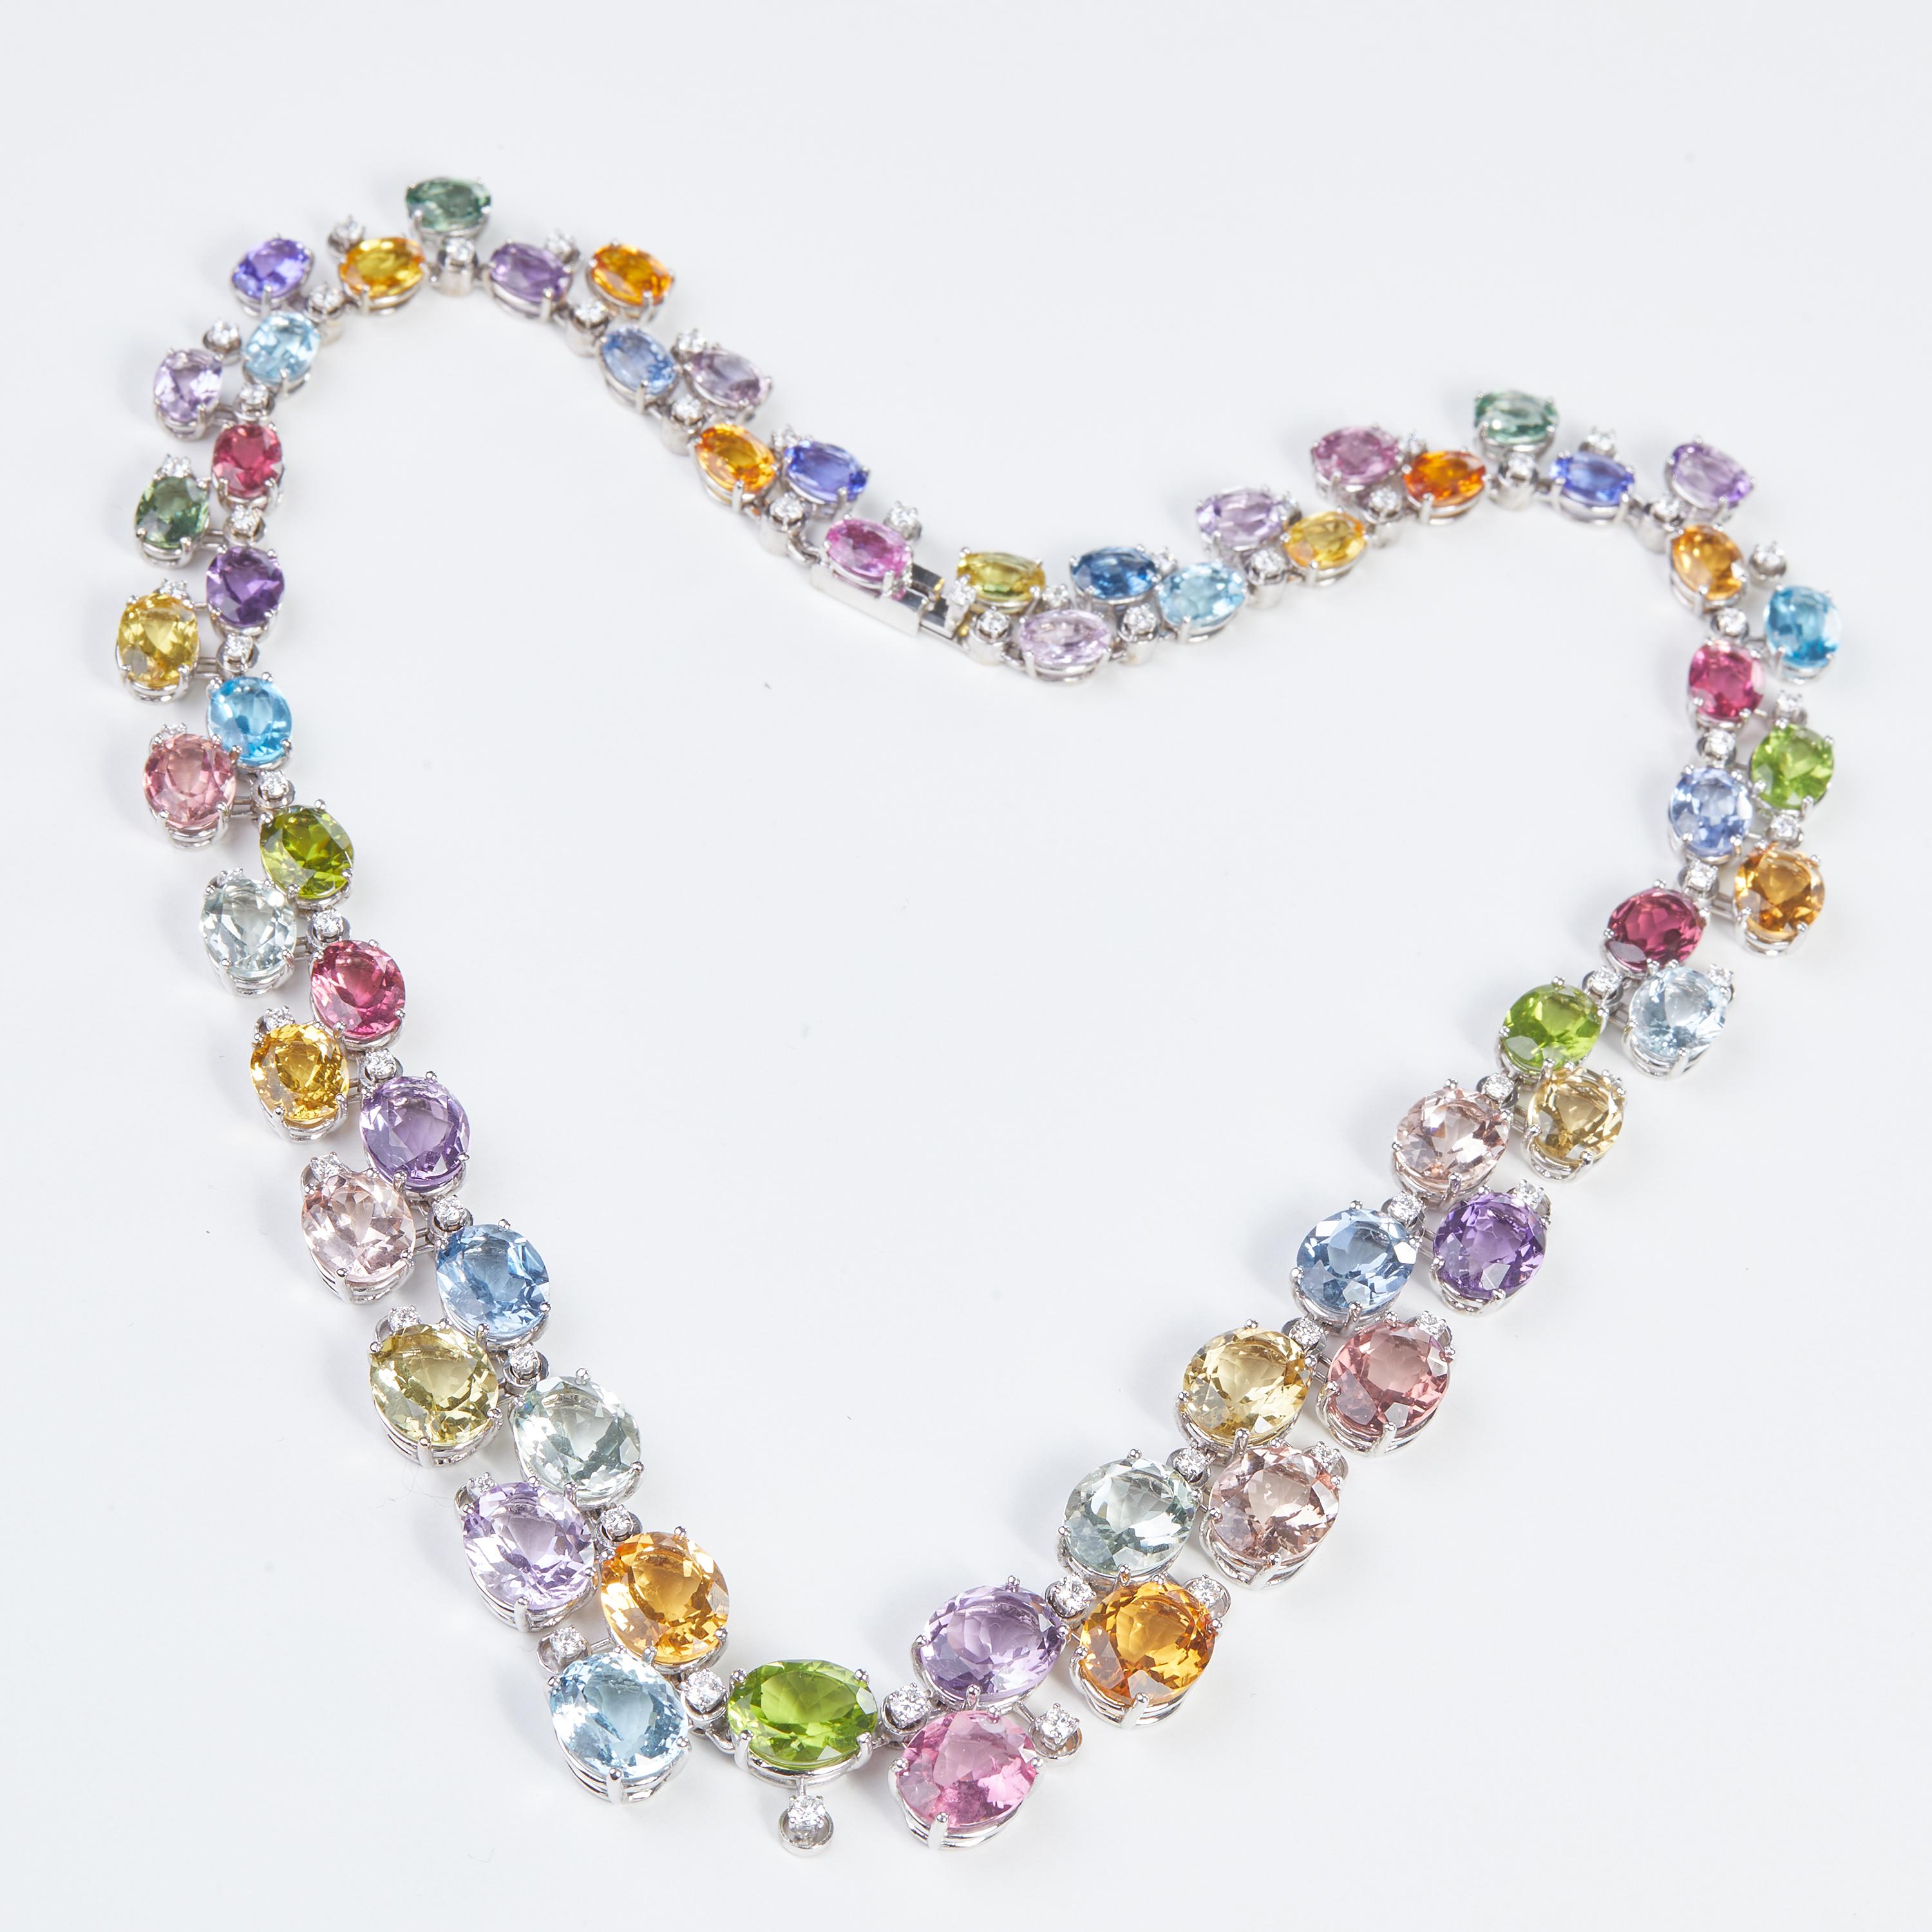 18 Karat White Gold Diamond and Multi Col Necklace
59 Diamonds 3.23Carat
62 Multi Color  Gem Stones 155.36 Carat

Founded in 1974, Gianni Lazzaro is a family-owned jewelery company based out of Düsseldorf, Germany.
Although rooted in Germany, Gianni